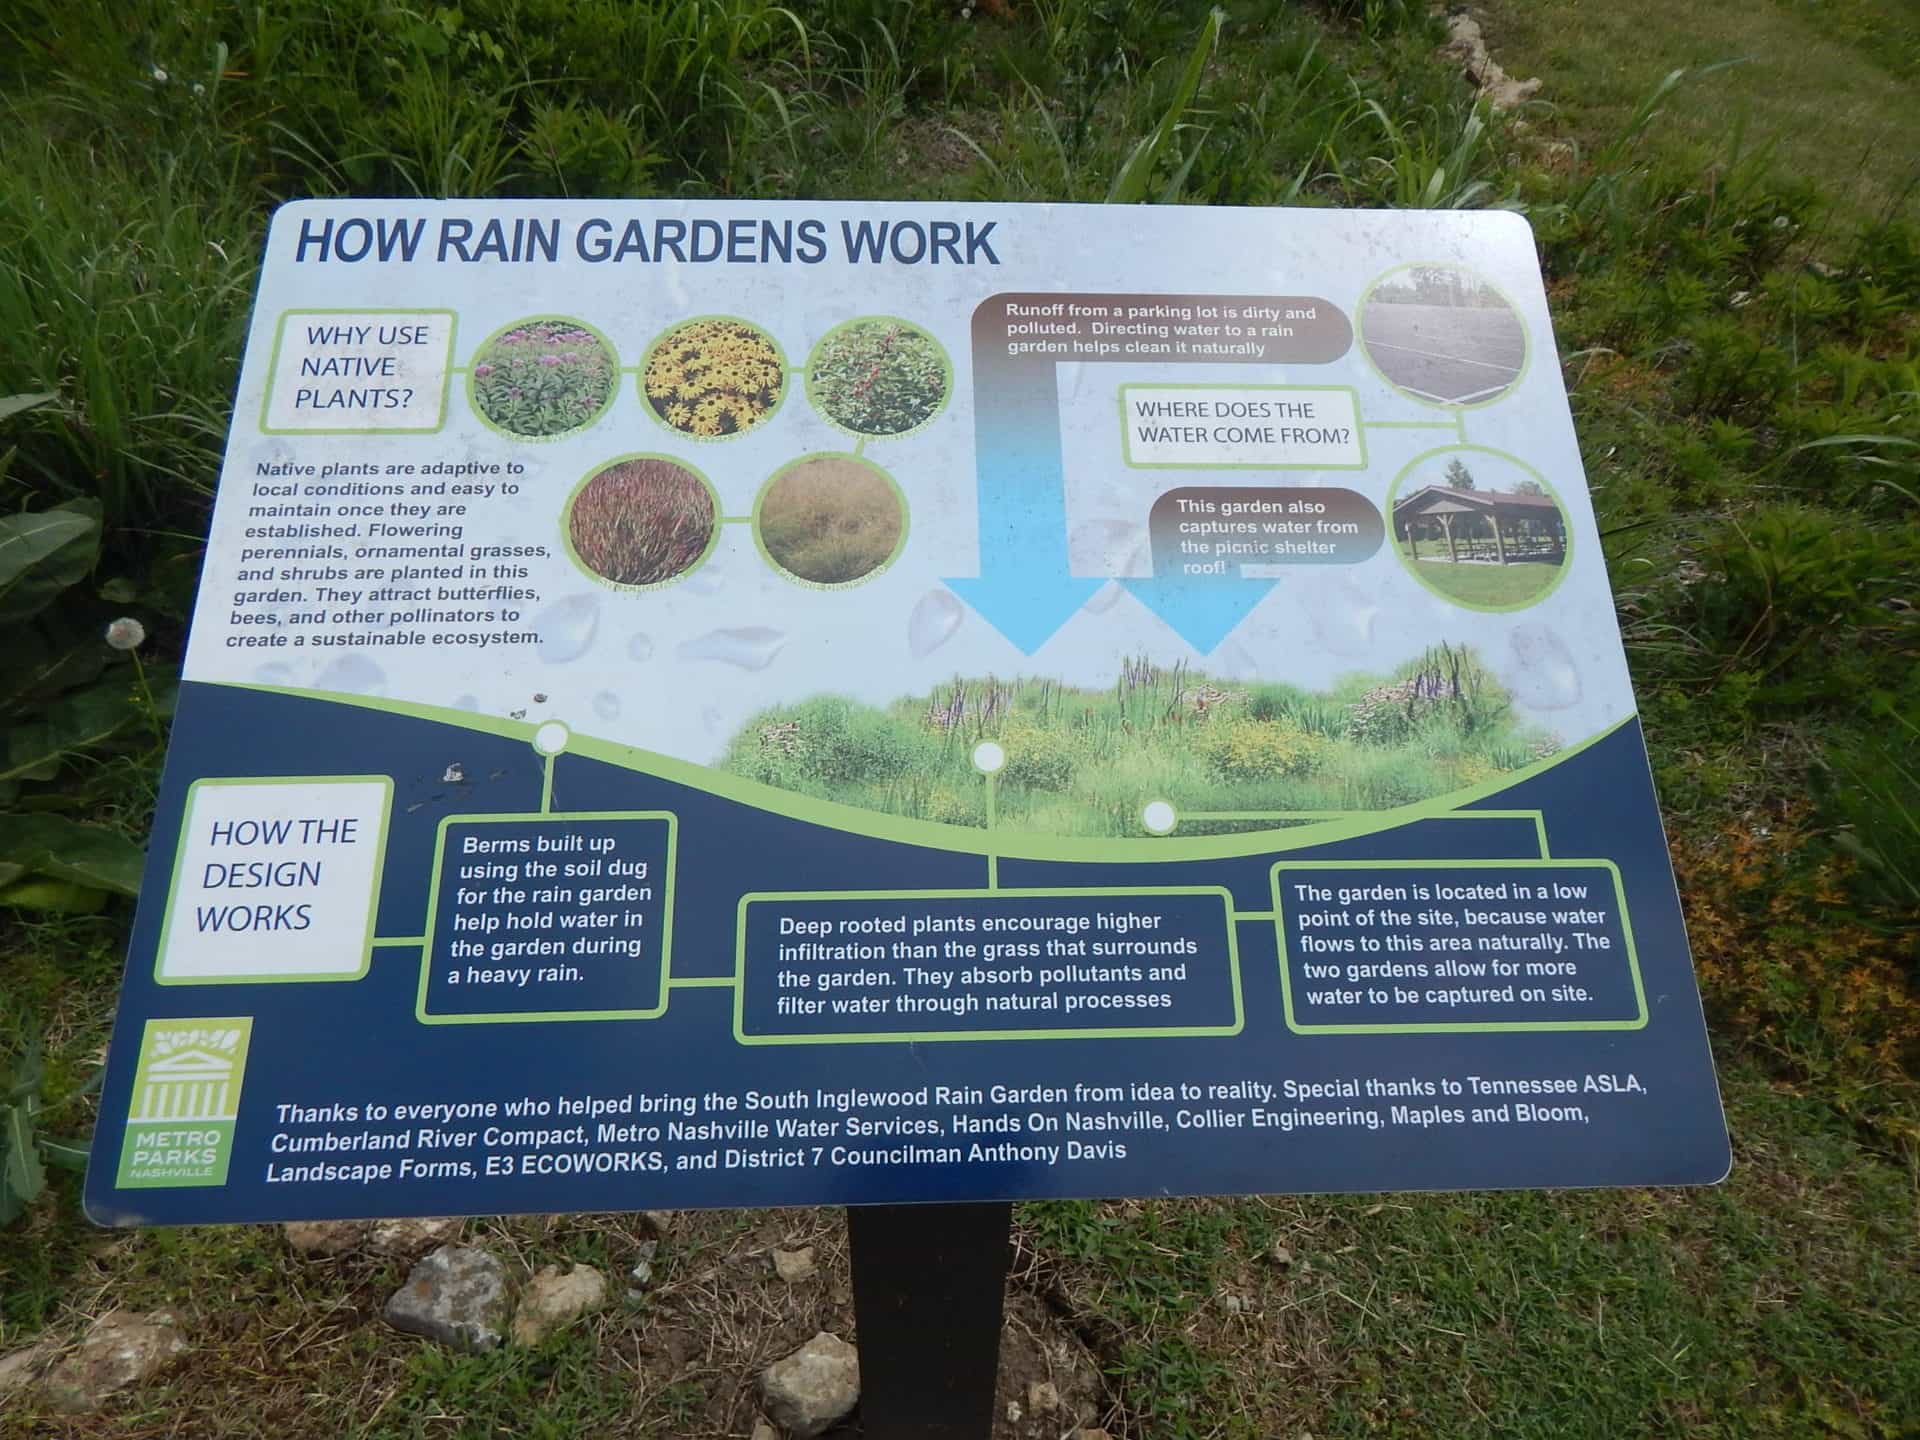 South Inglewood Park and Community Center - Sign about the Rain Garden